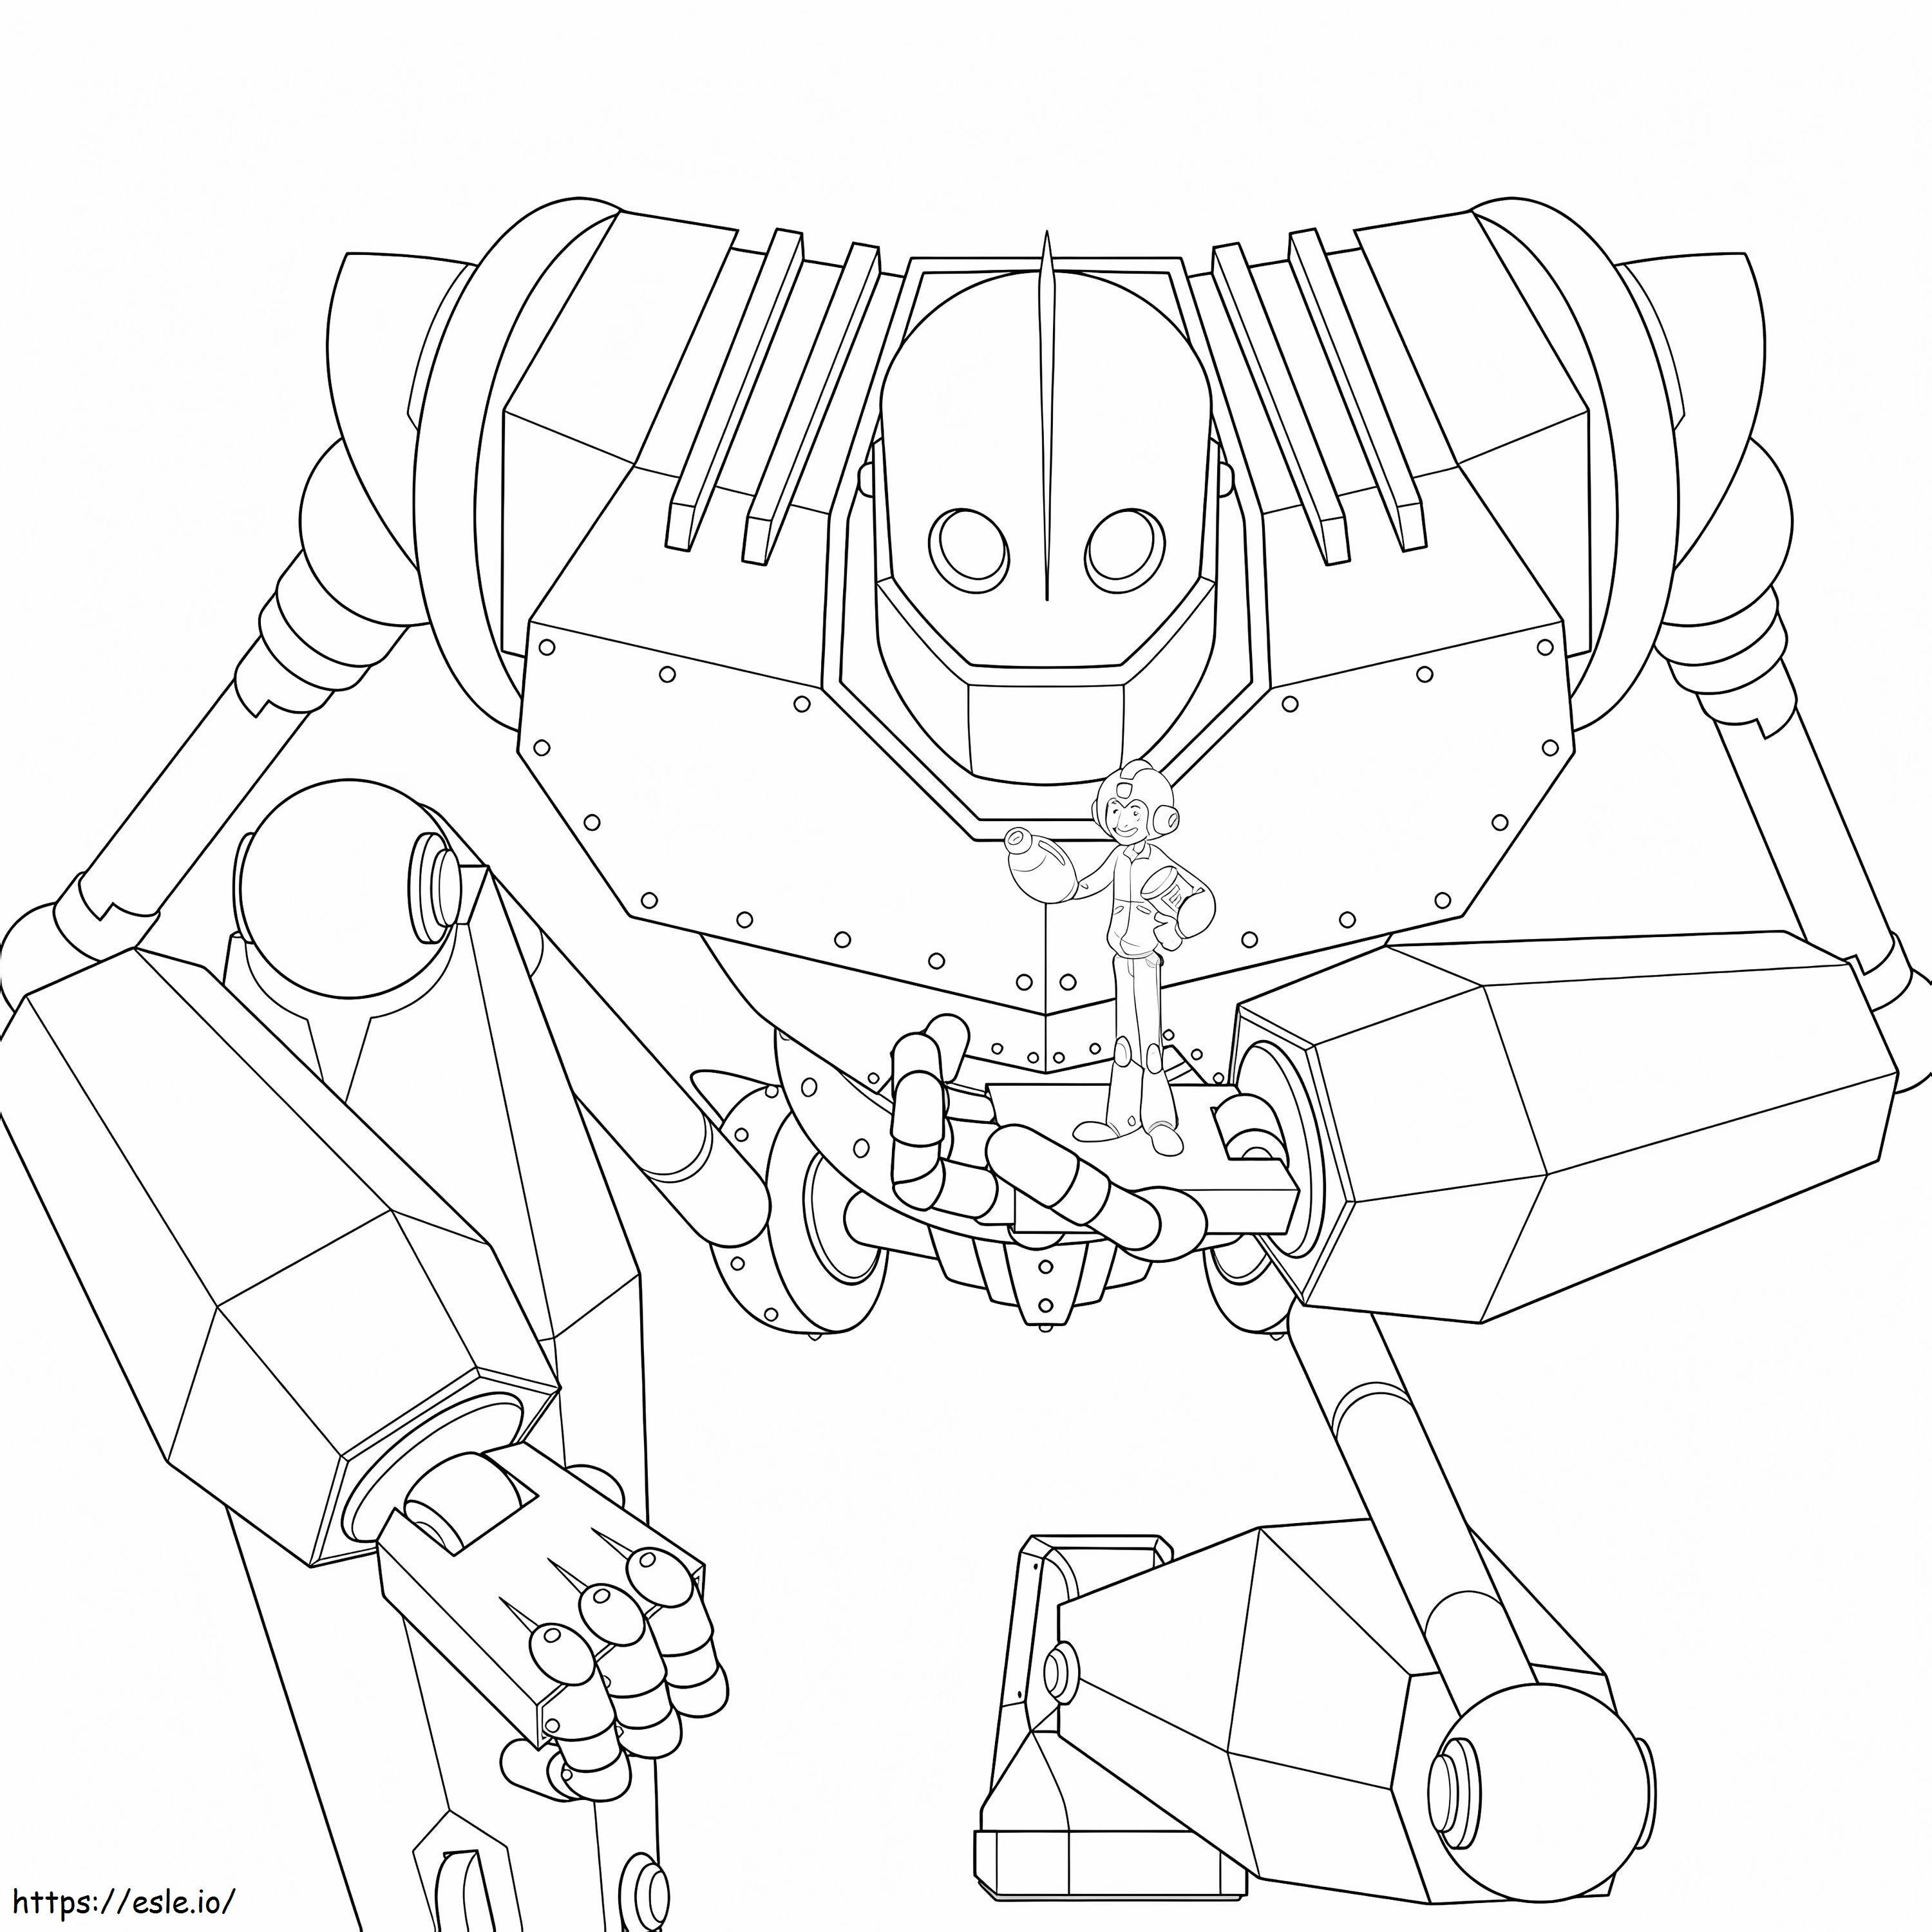 Iron Giant 3 coloring page